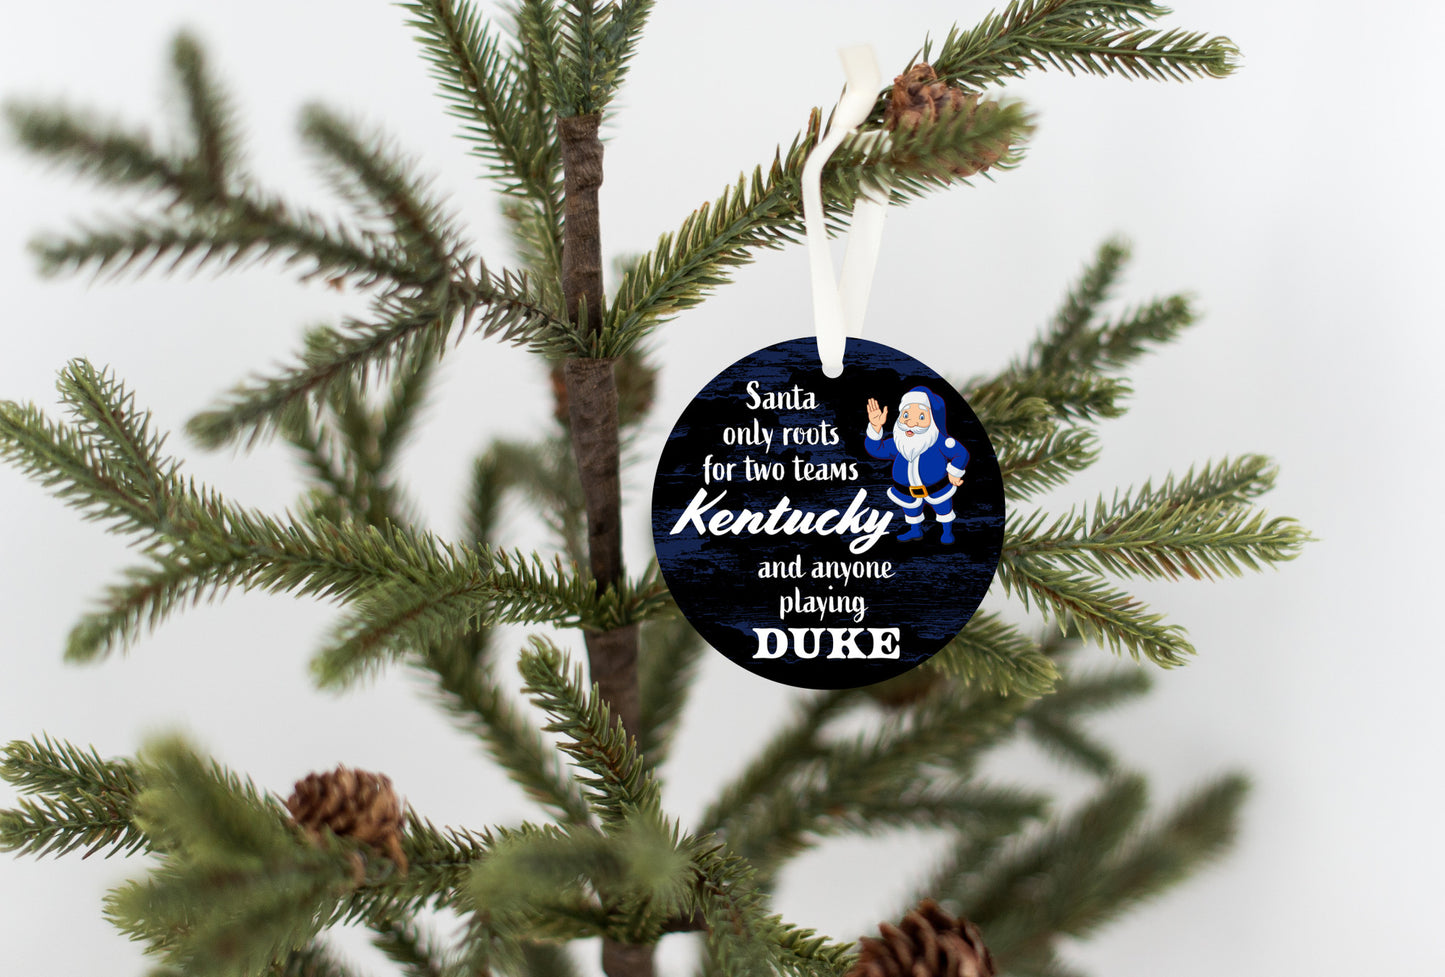 Santa Only Roots For Two Teams Kentucky And Anyone Playing Duke Ornament